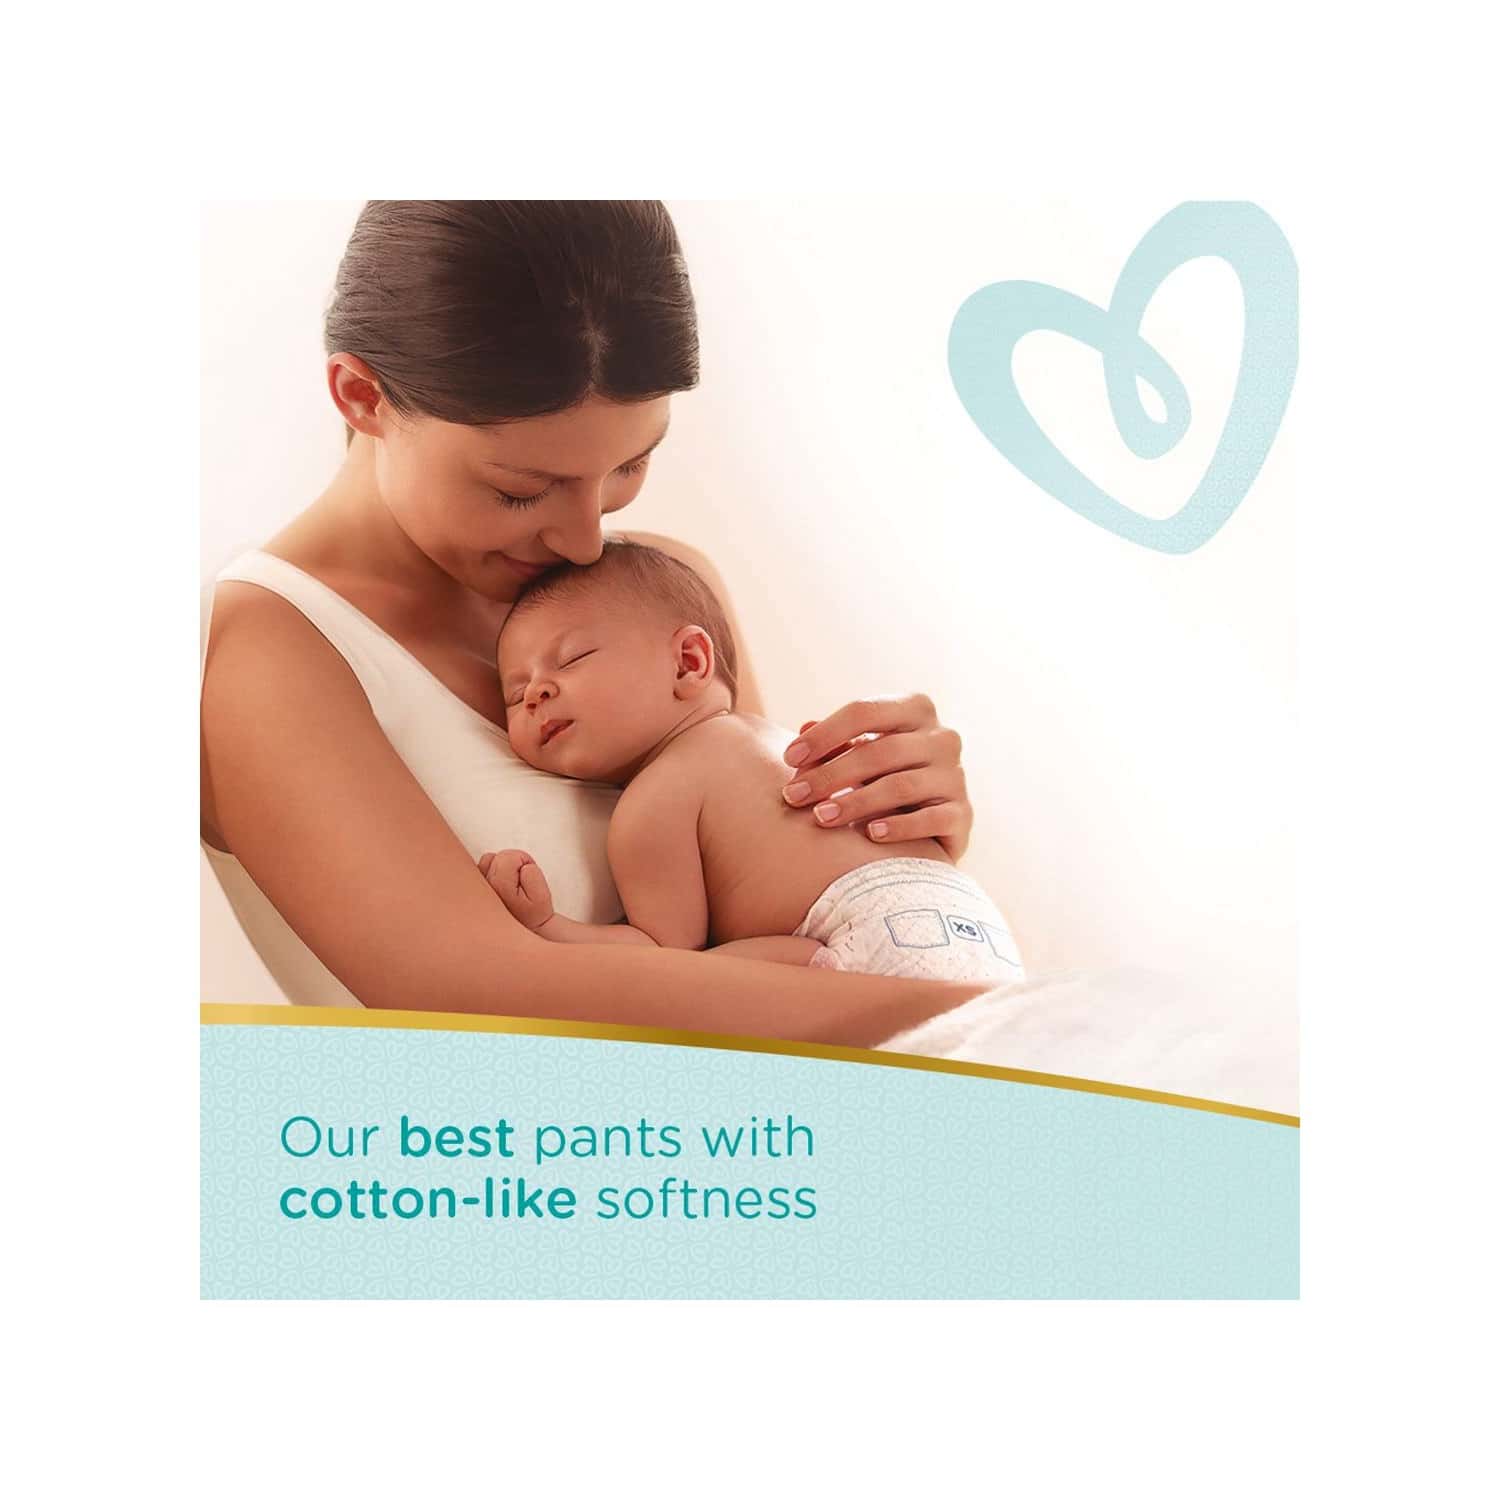 Buy Pampers Active Baby Diapers, New Born & Premium Care Pants, Medium size  baby diapers (MD), 54 Count, Softest ever Pampers pants & Premium Care Pants,  Large size baby diapers (LG), 44